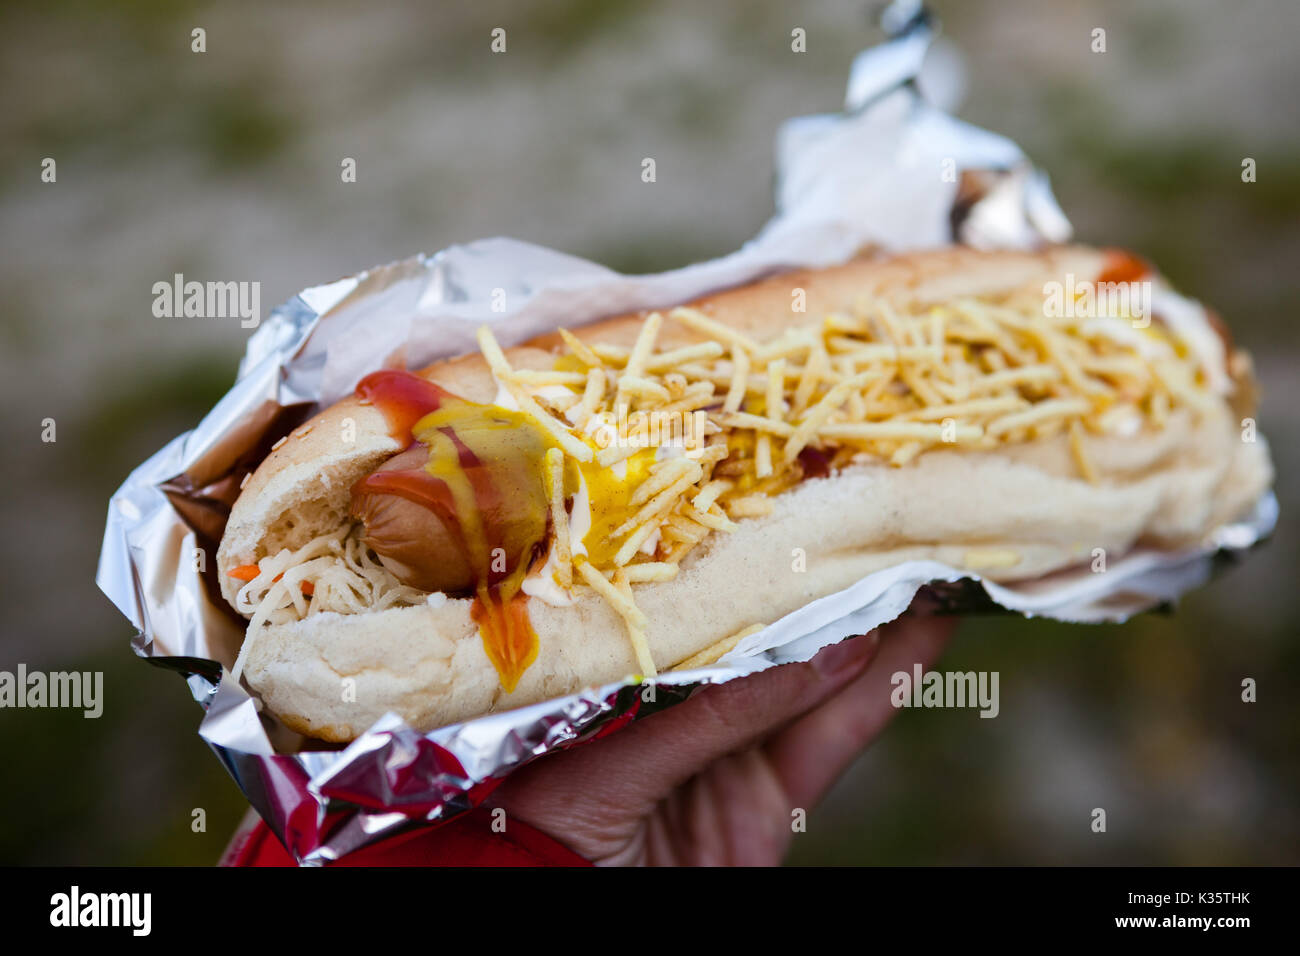 Hot dog with chips Stock Photo